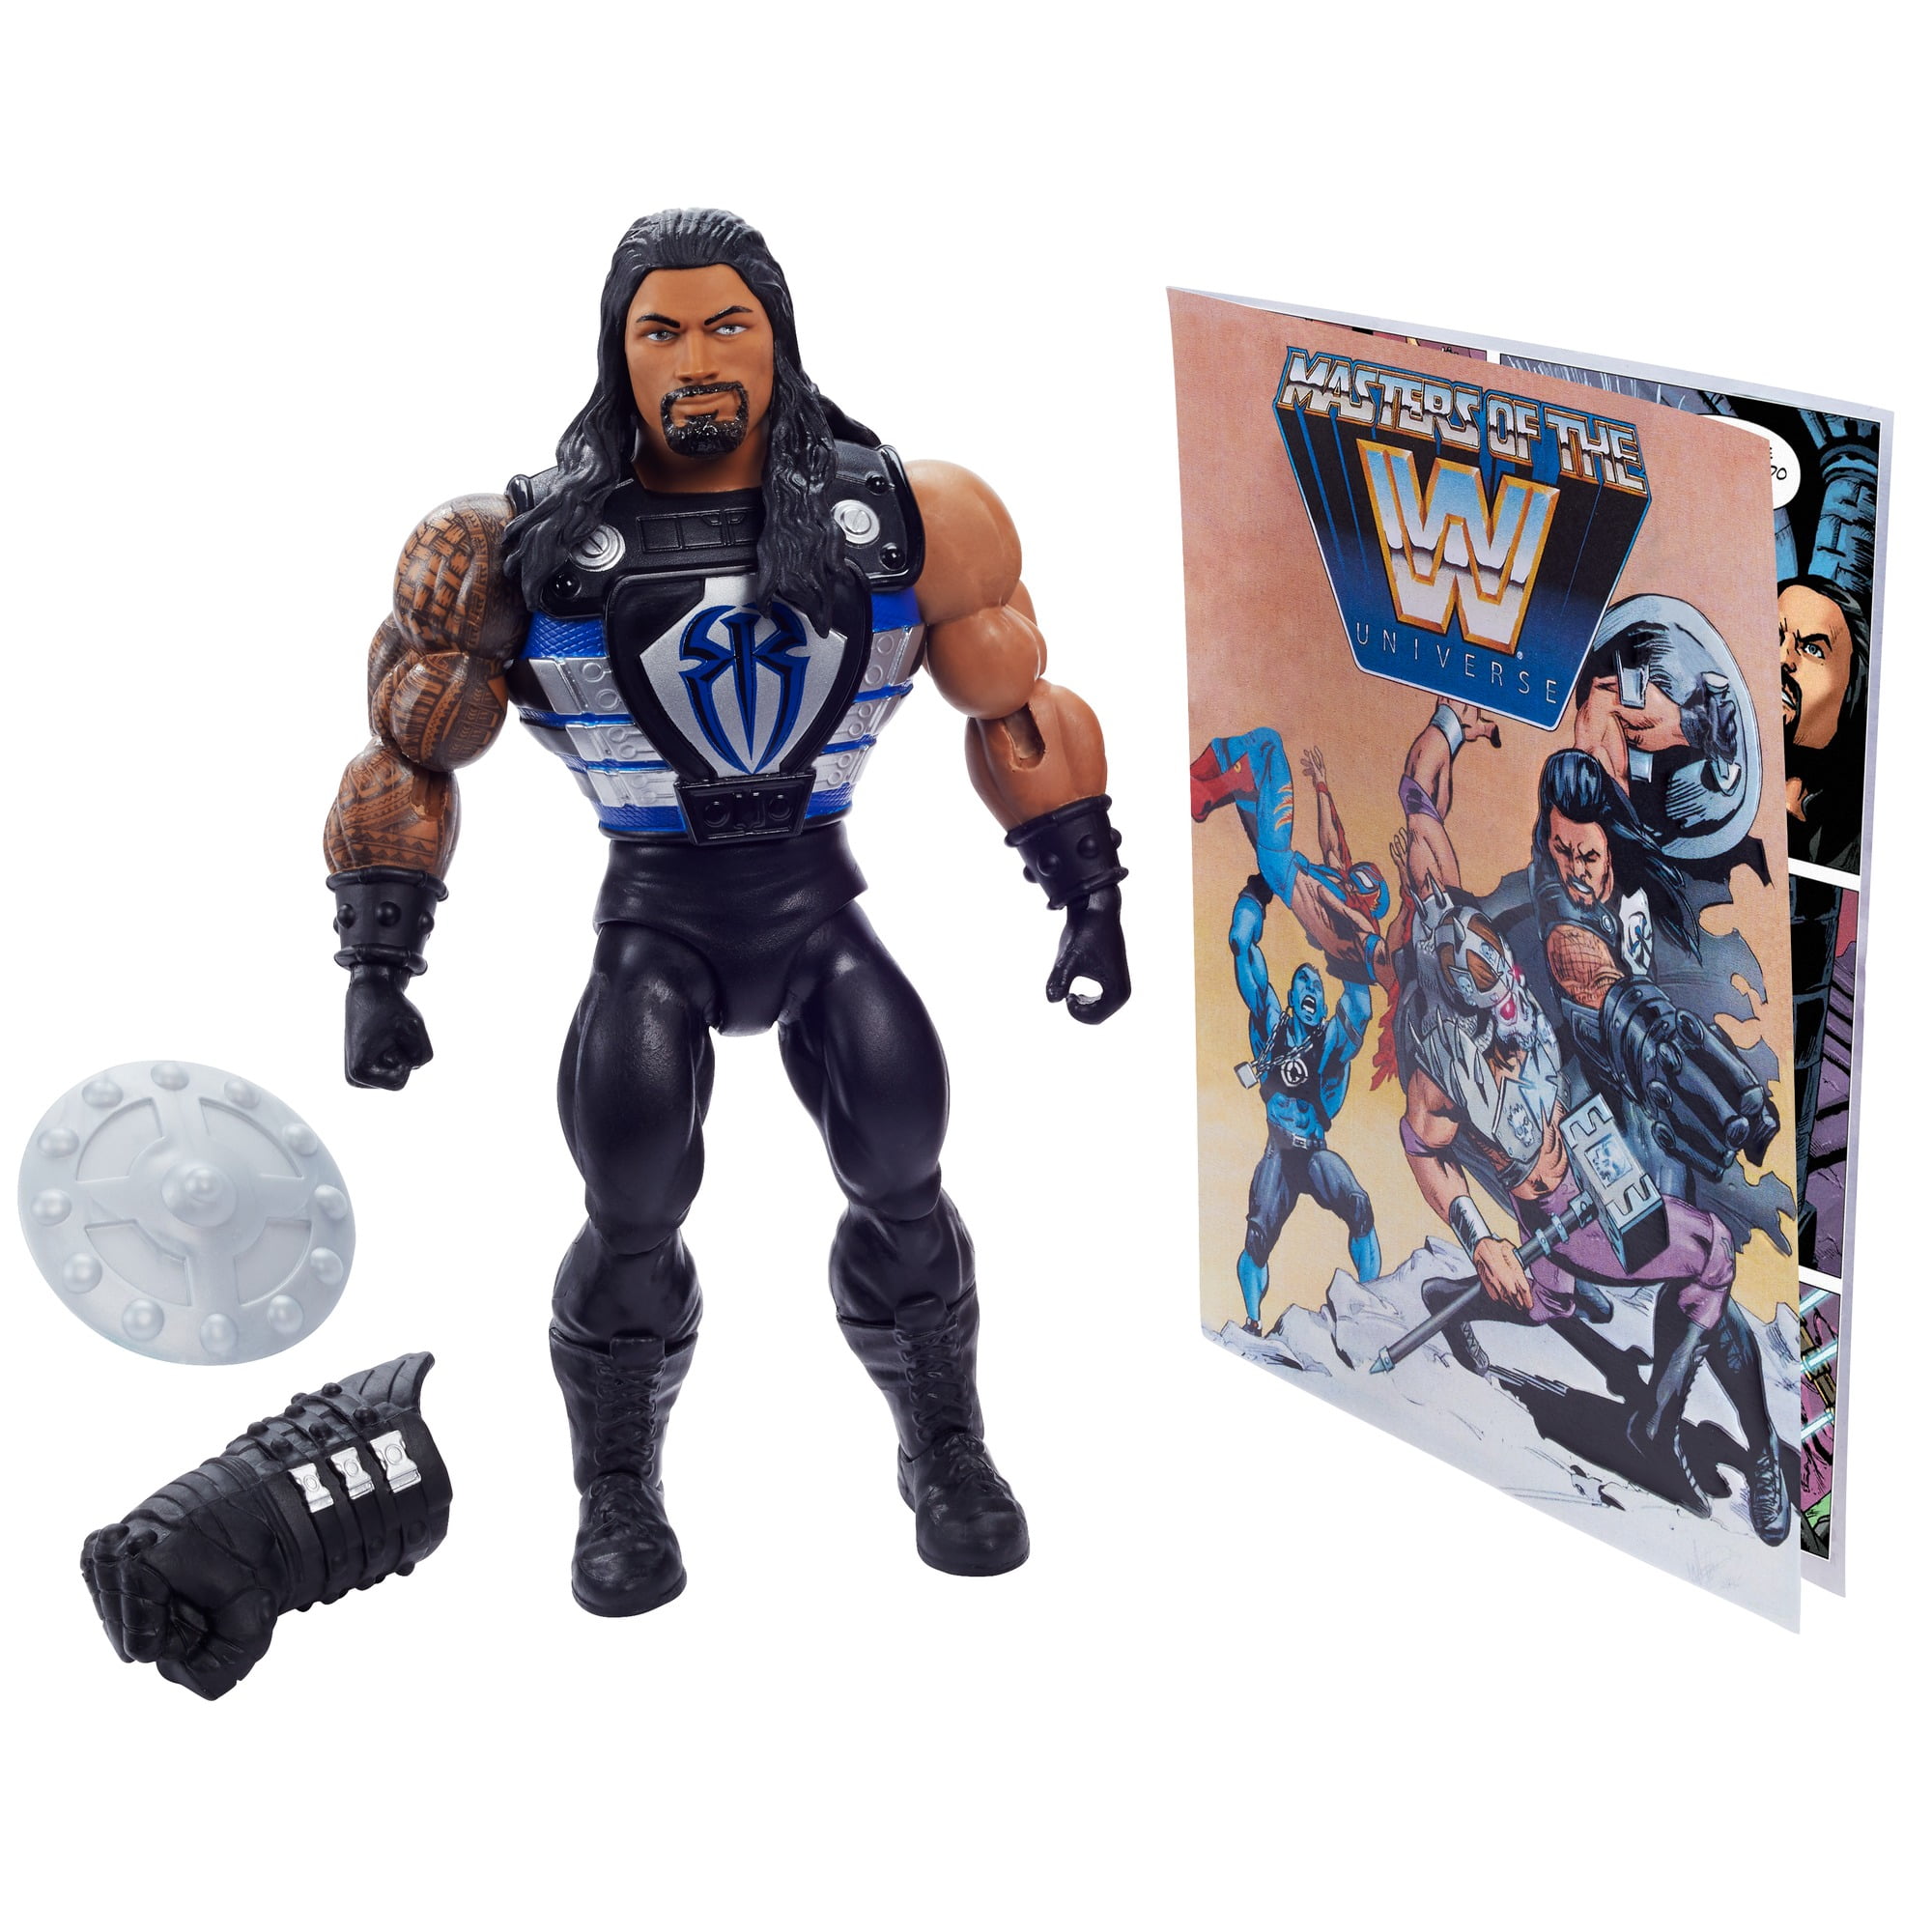 Wwe Masters Of The Wwe Universe Roman Reigns Action Figure Walmart Com